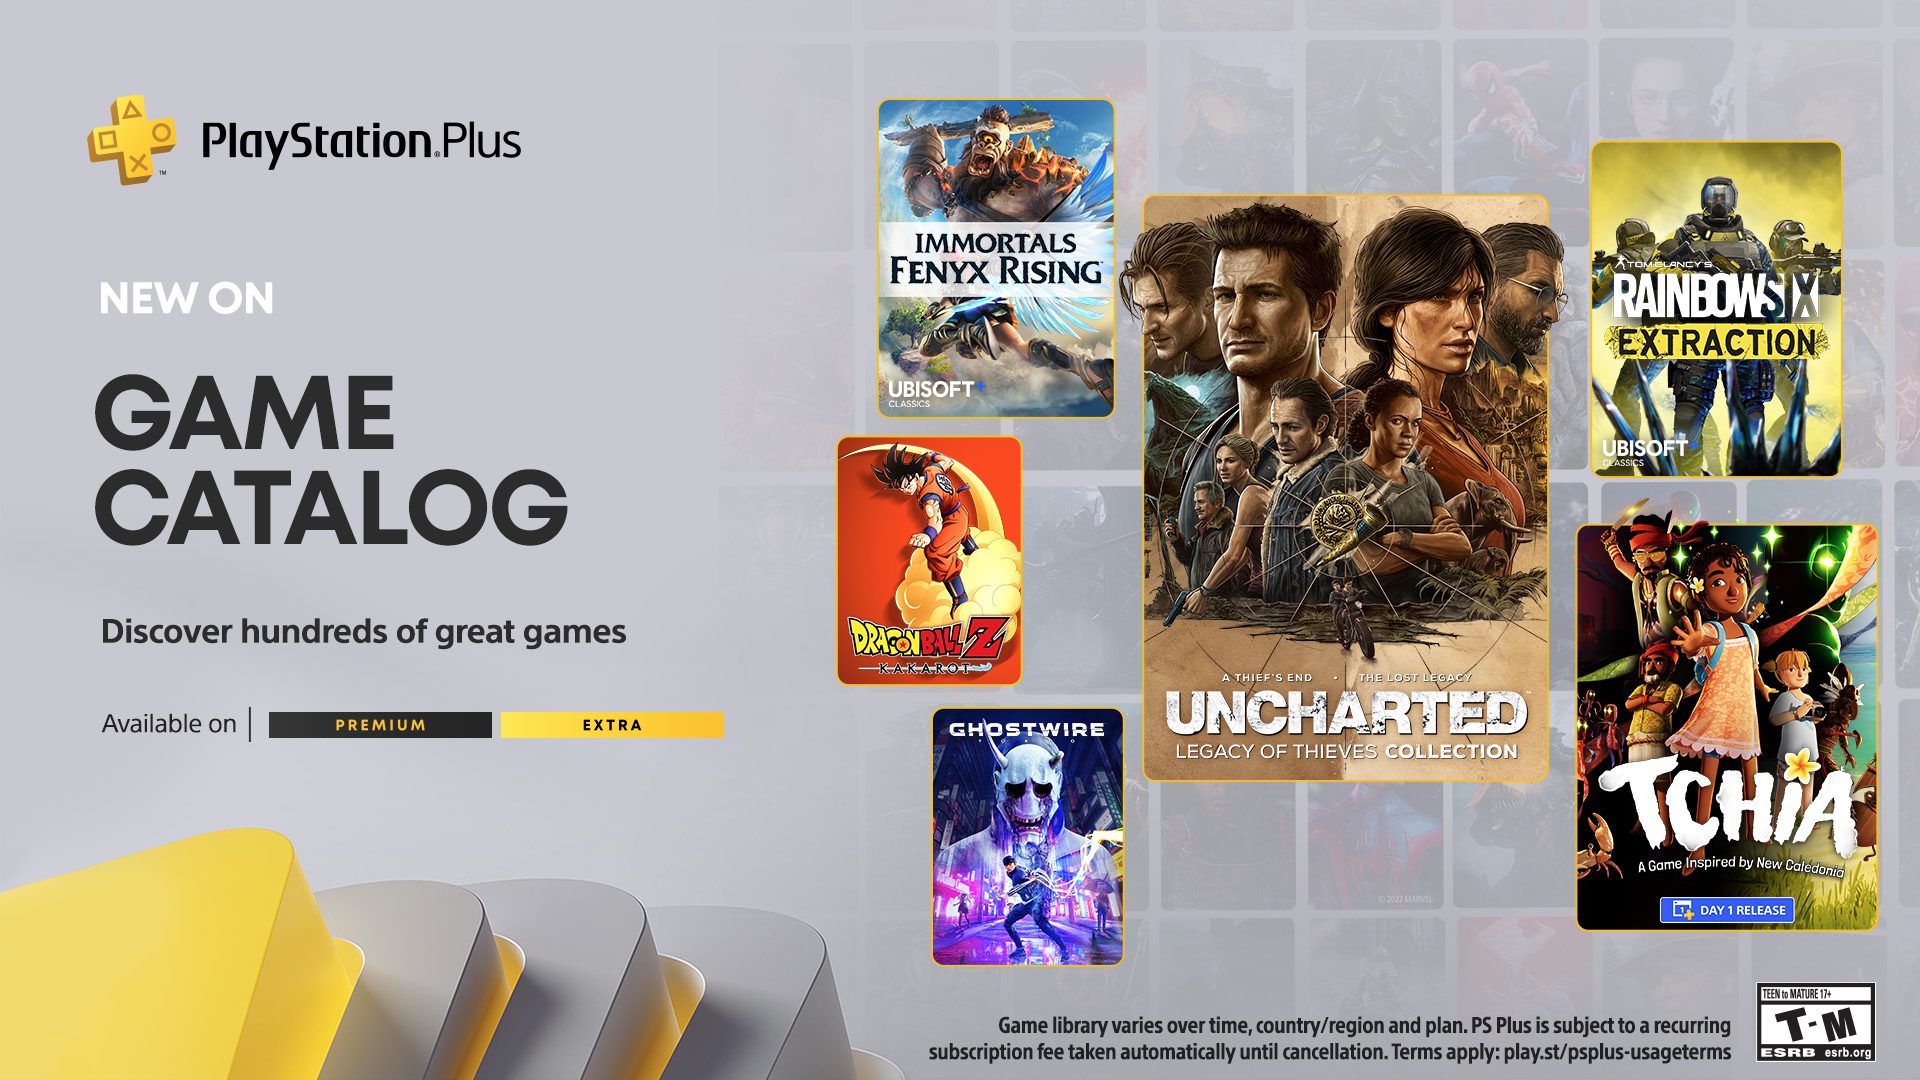 New PlayStation Plus Games Announced: Experience Epic Adventures From Uncharted to Immortals Fenyx Rising! 23